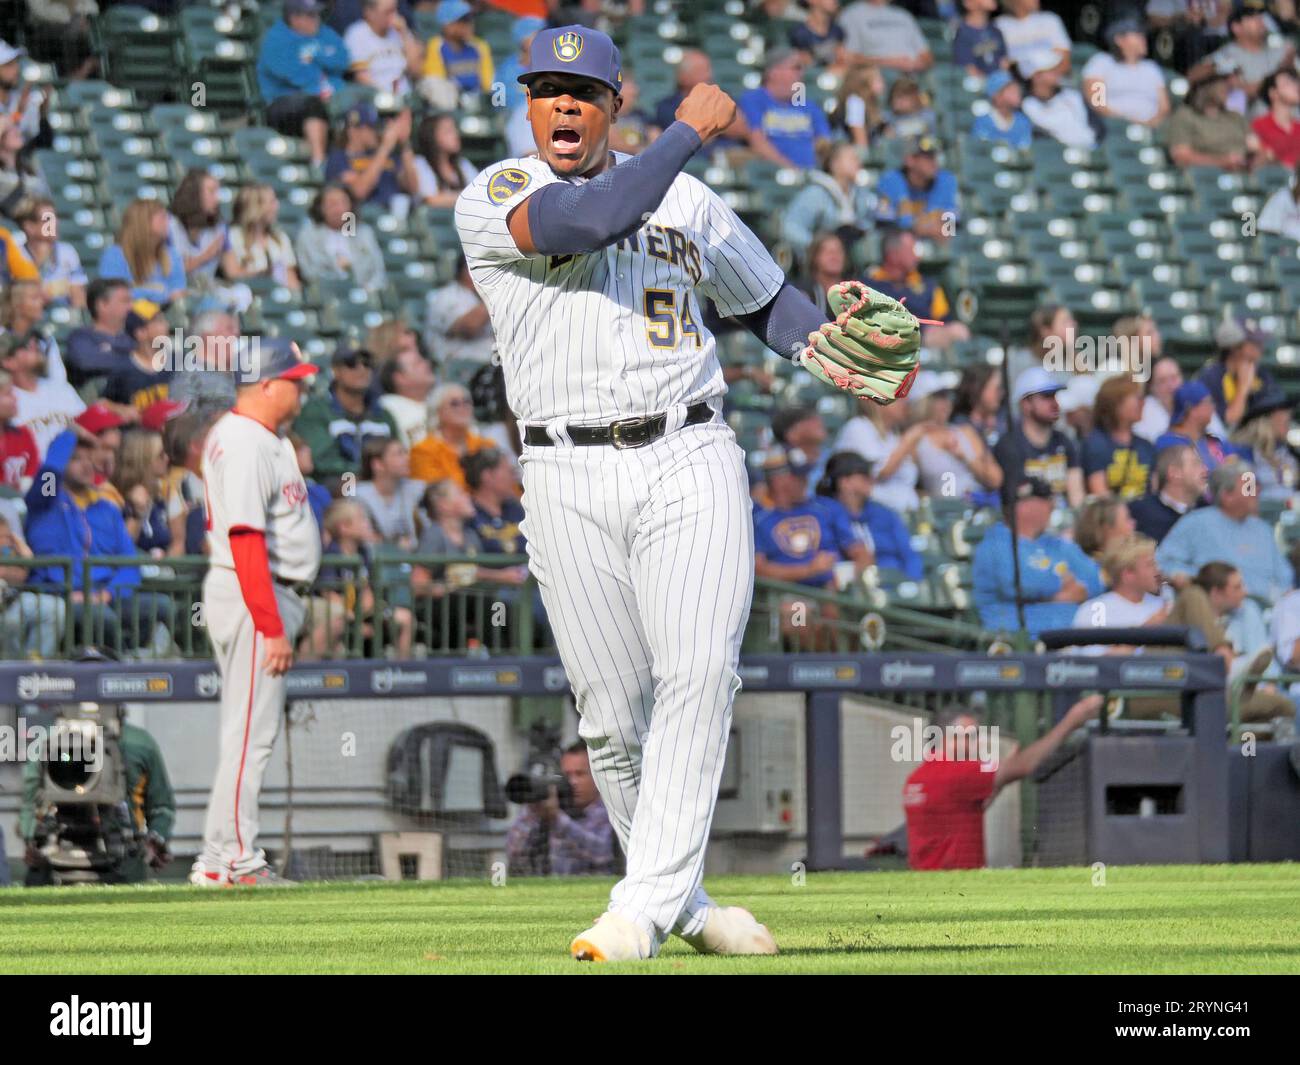 Milwaukee, WI USA; against the Washington Nationals relief pitcher Thyago Viera (54) shows emotion after an out during an MLB game against the Washing Stock Photo